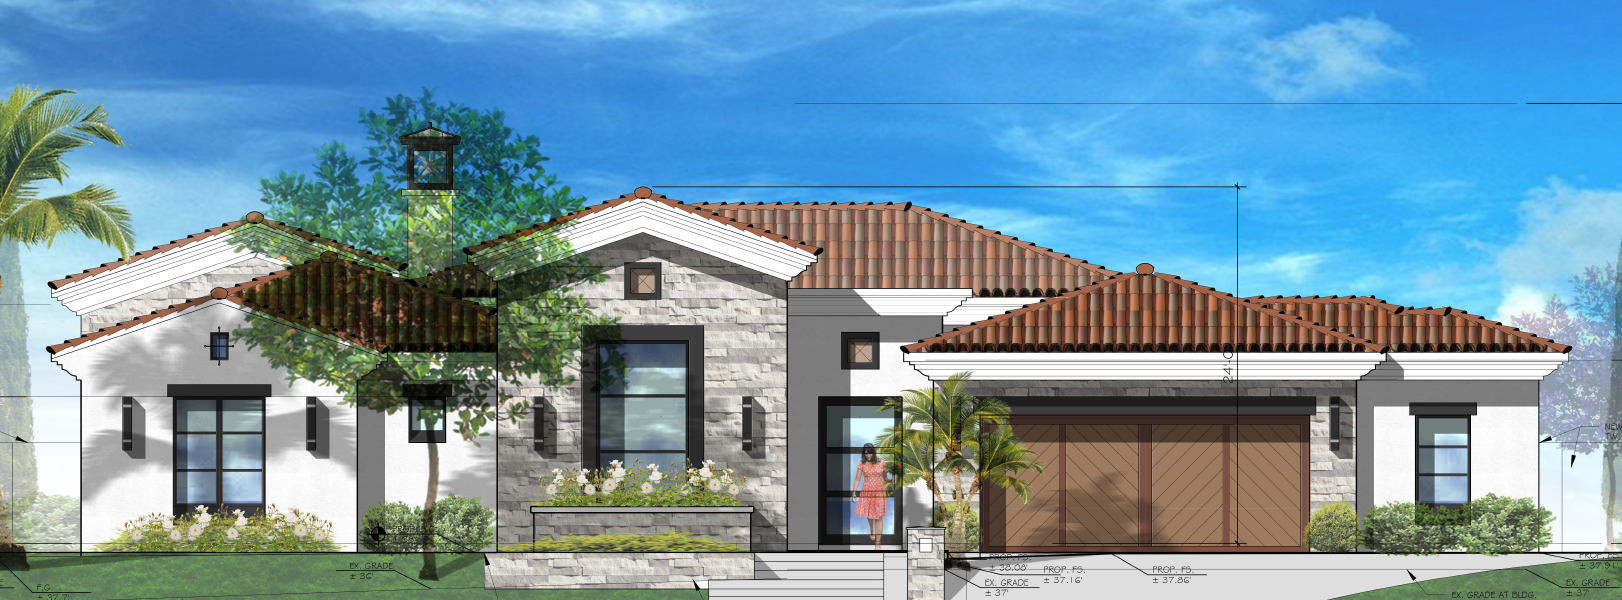 01-yng-architects-on-the-boards-la-quinta-lot-23-east-elevation.png